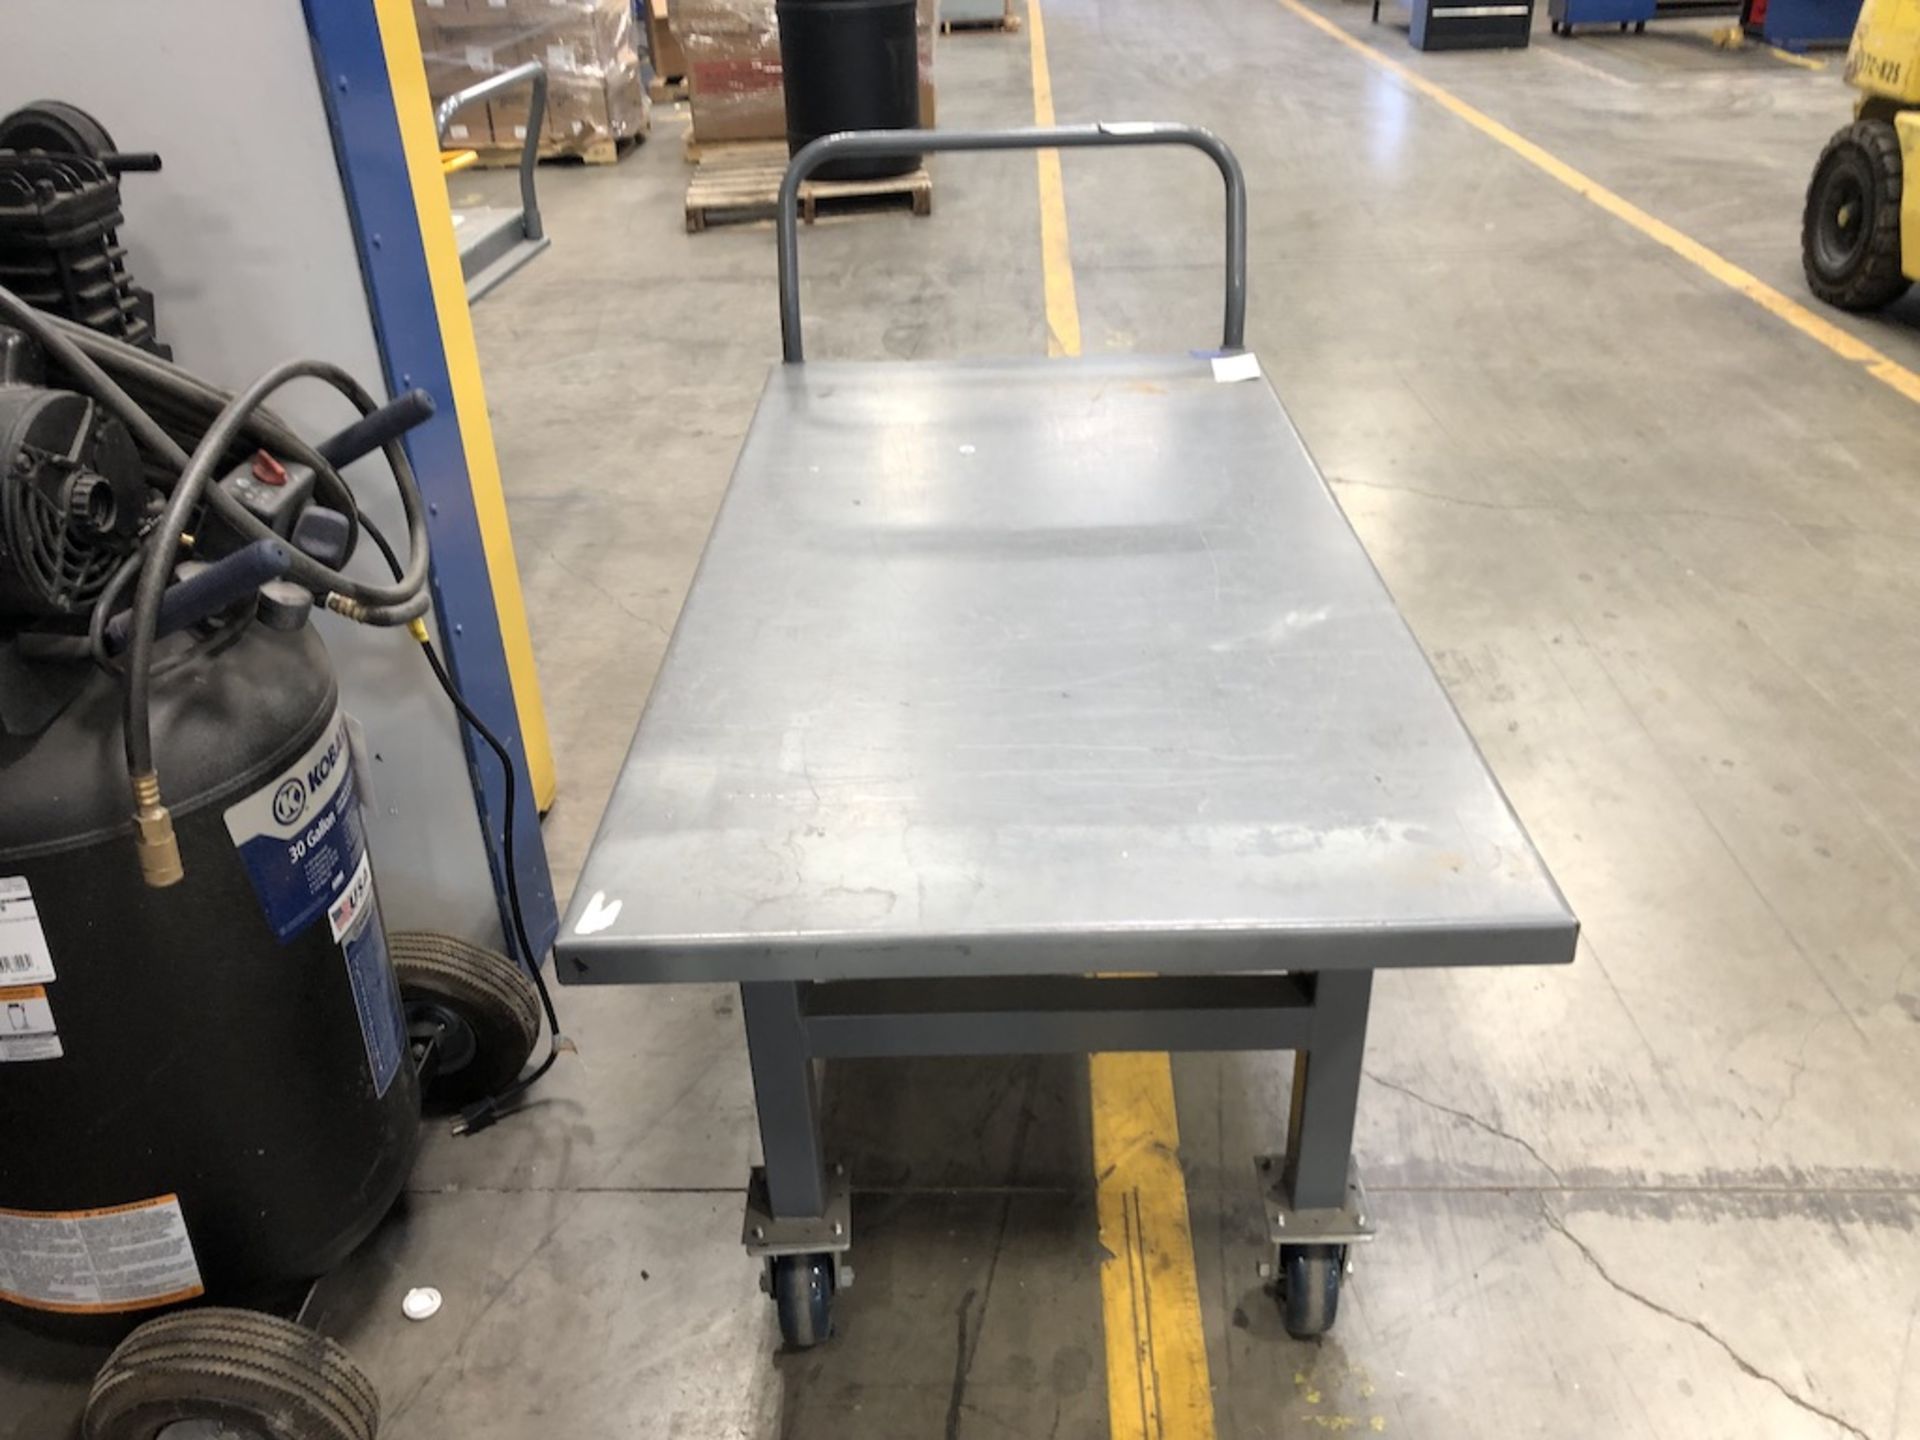 ULINE STEEL PLATFORM CART ( CONTENTS NOT INCLUDED ) 64IN L X 30 IN W X 37 IN H - Image 3 of 7